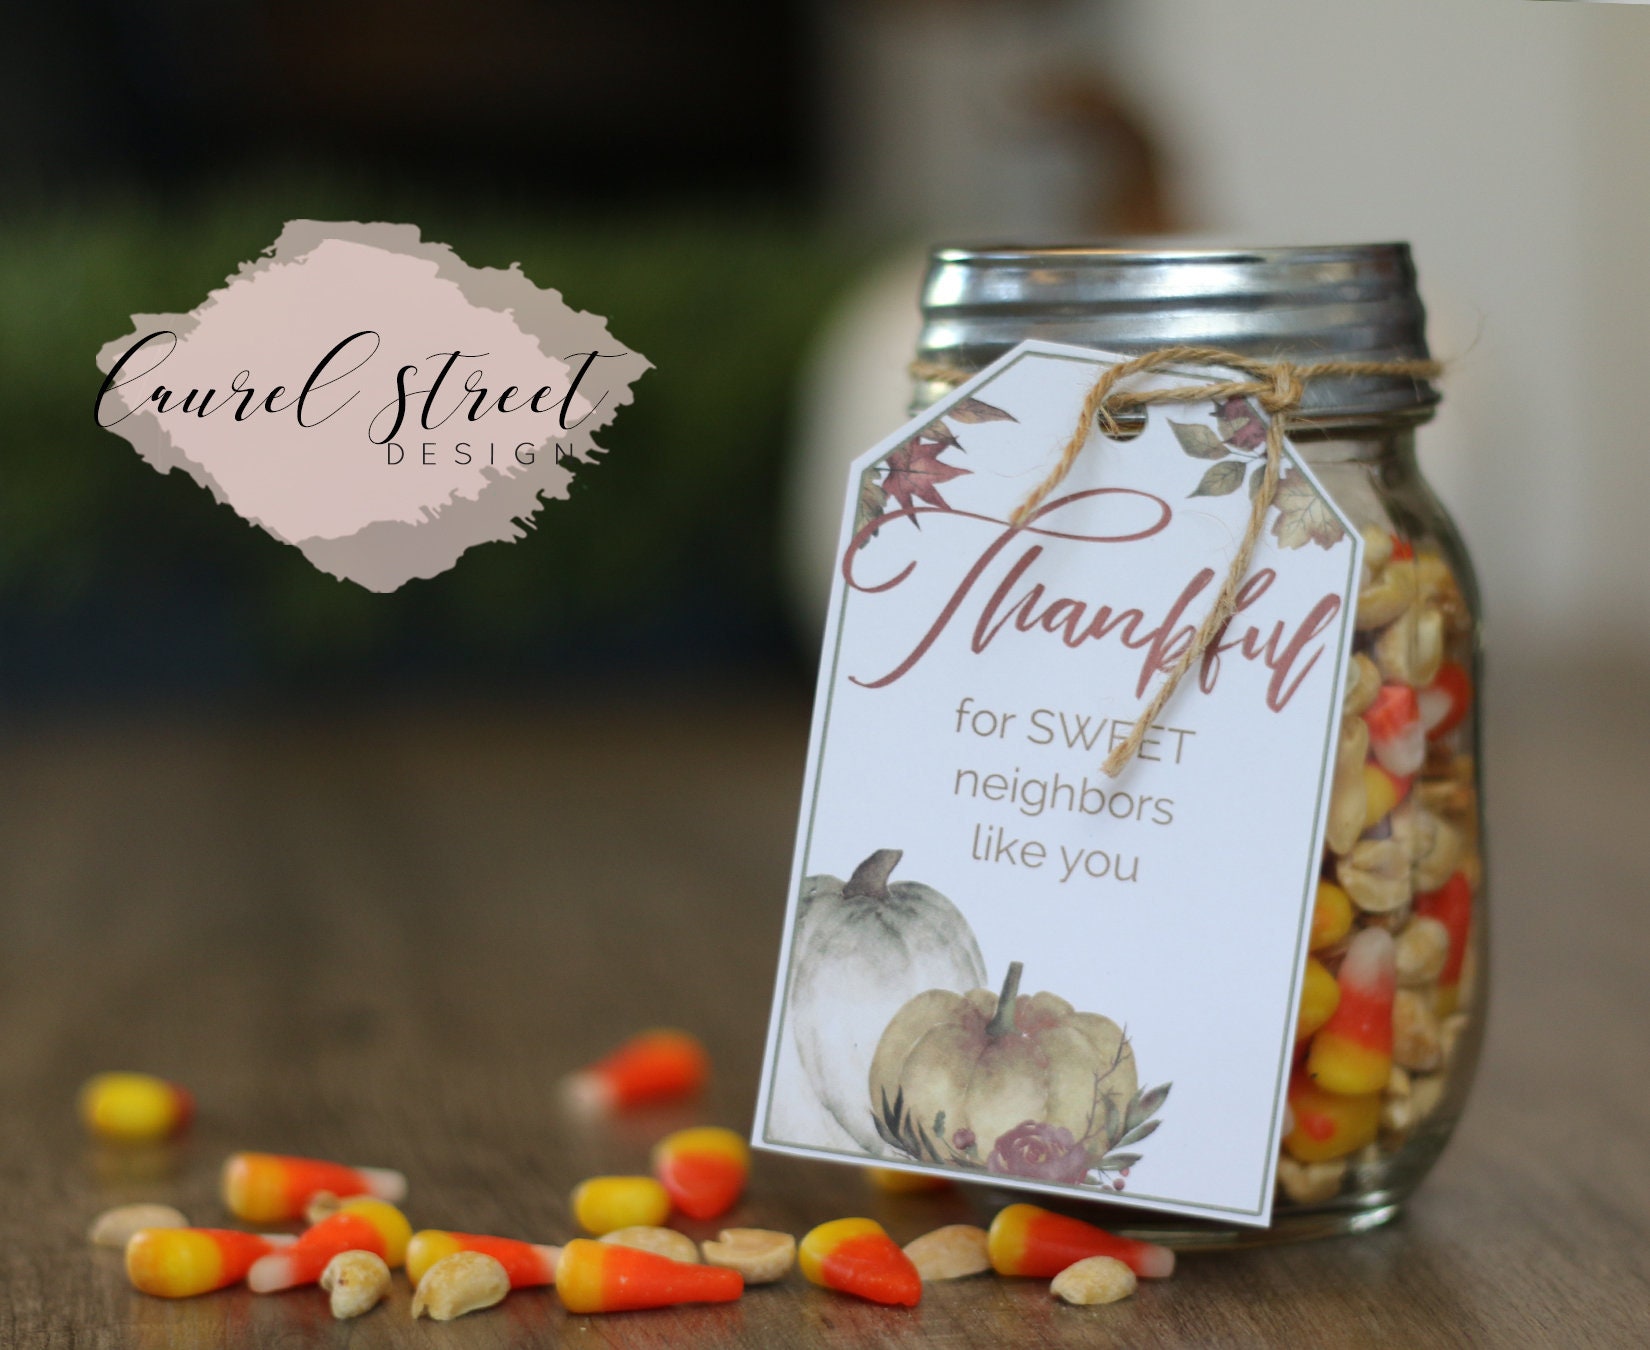 60 Thanksgiving Gifts for Neighbors